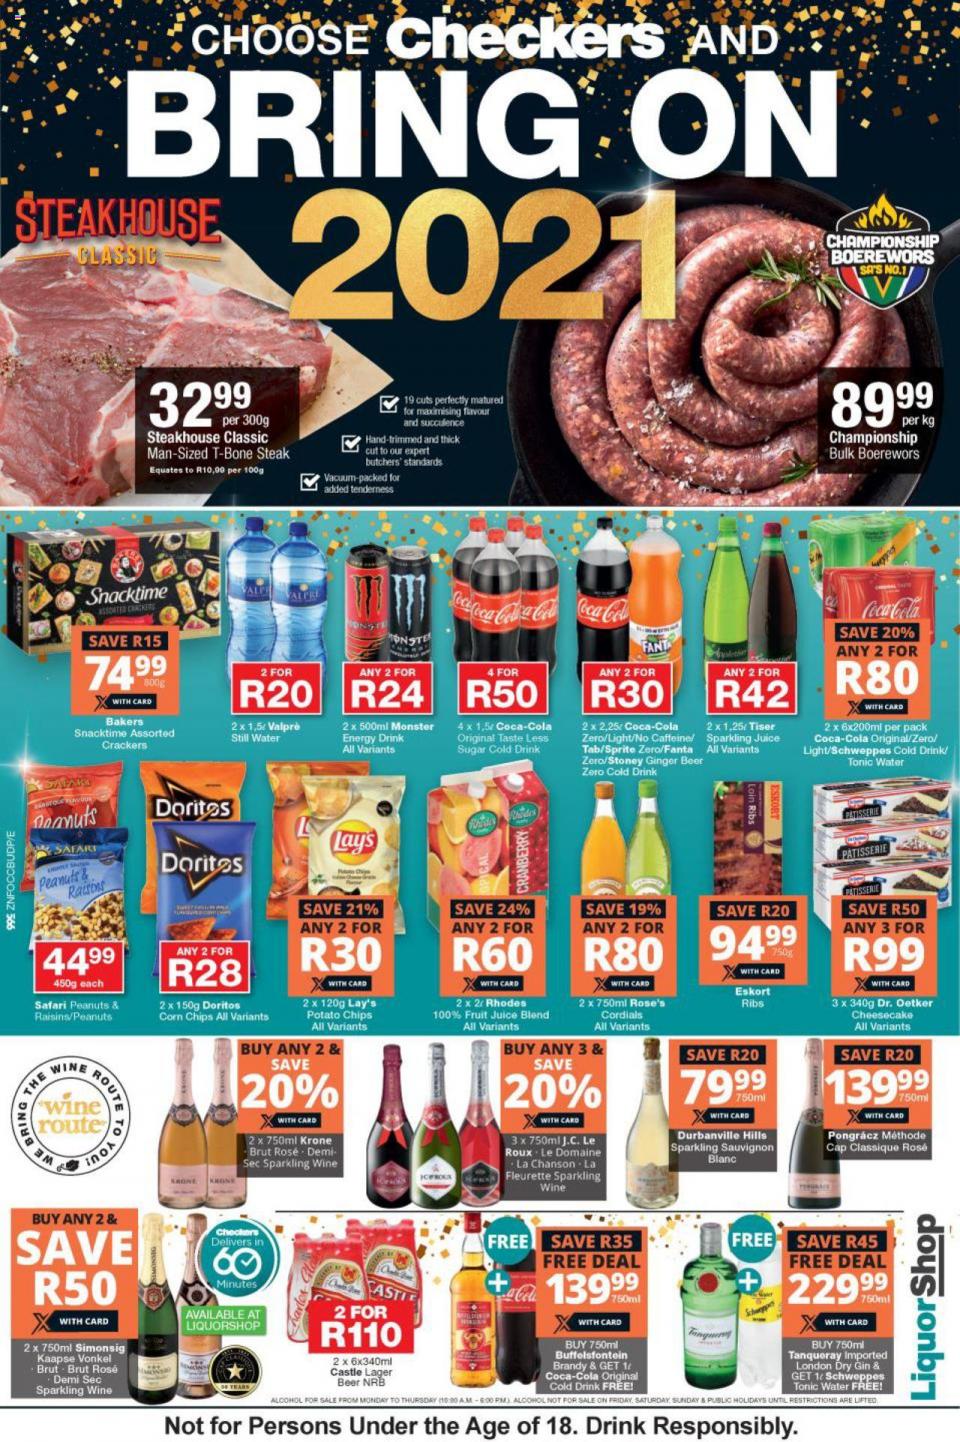 Checkers Specials New Year’s Deals 28 December 2020